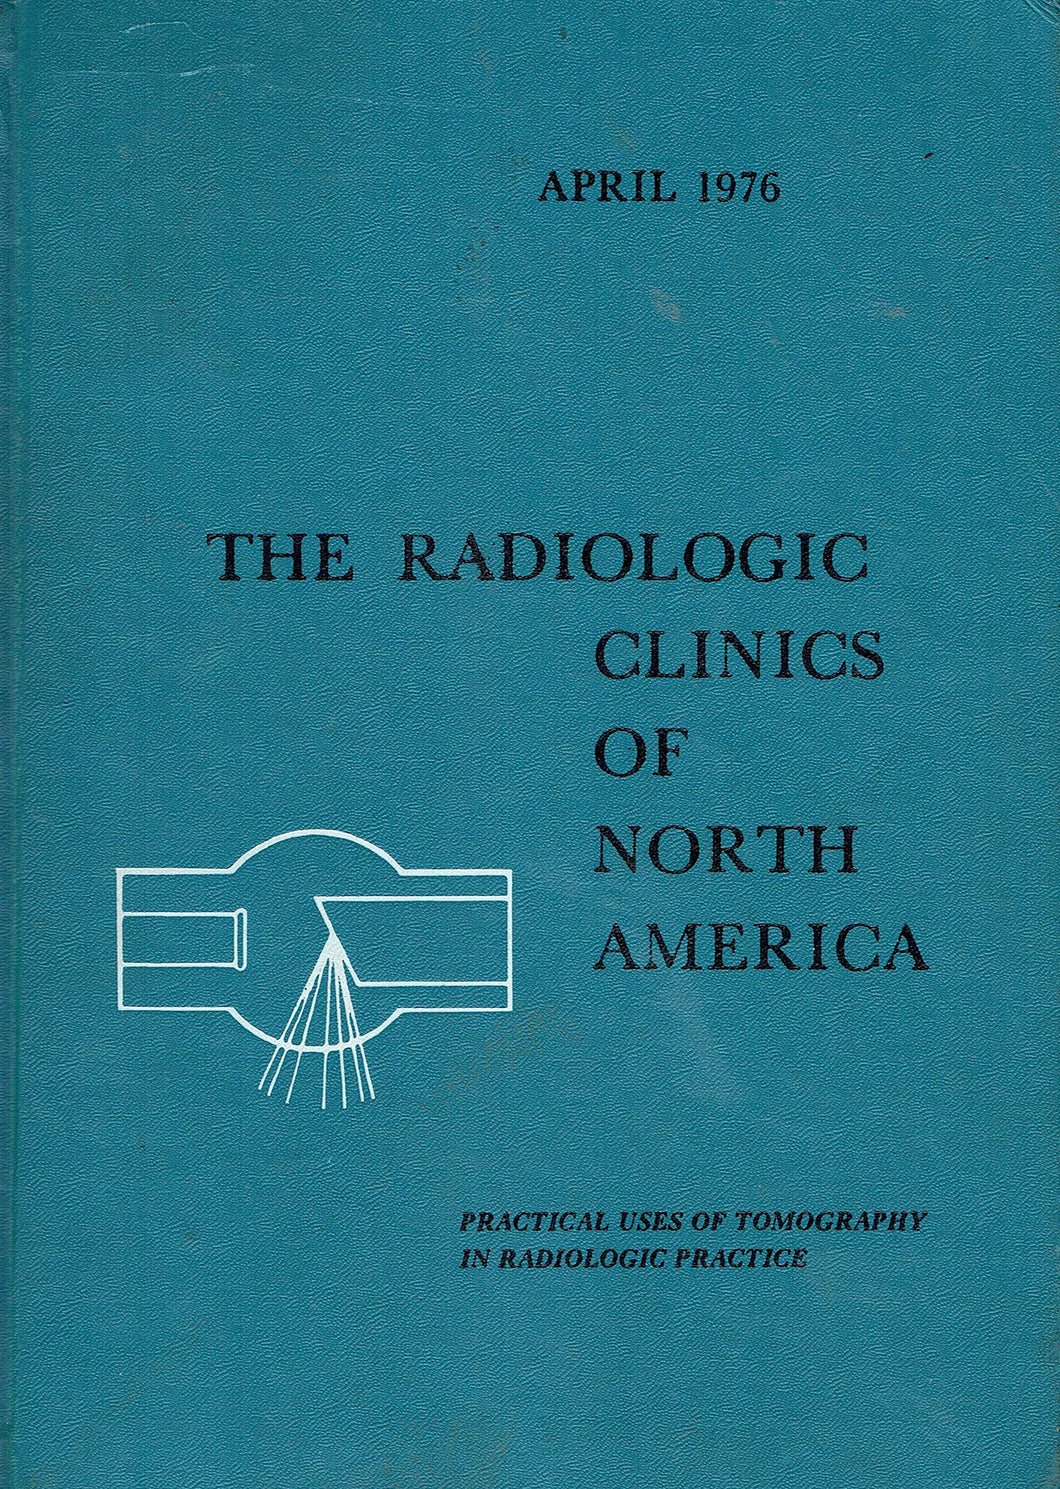 The Radiologic Clinics of North America, April 1976: Practical Uses of Tomography in Radiologic Practice